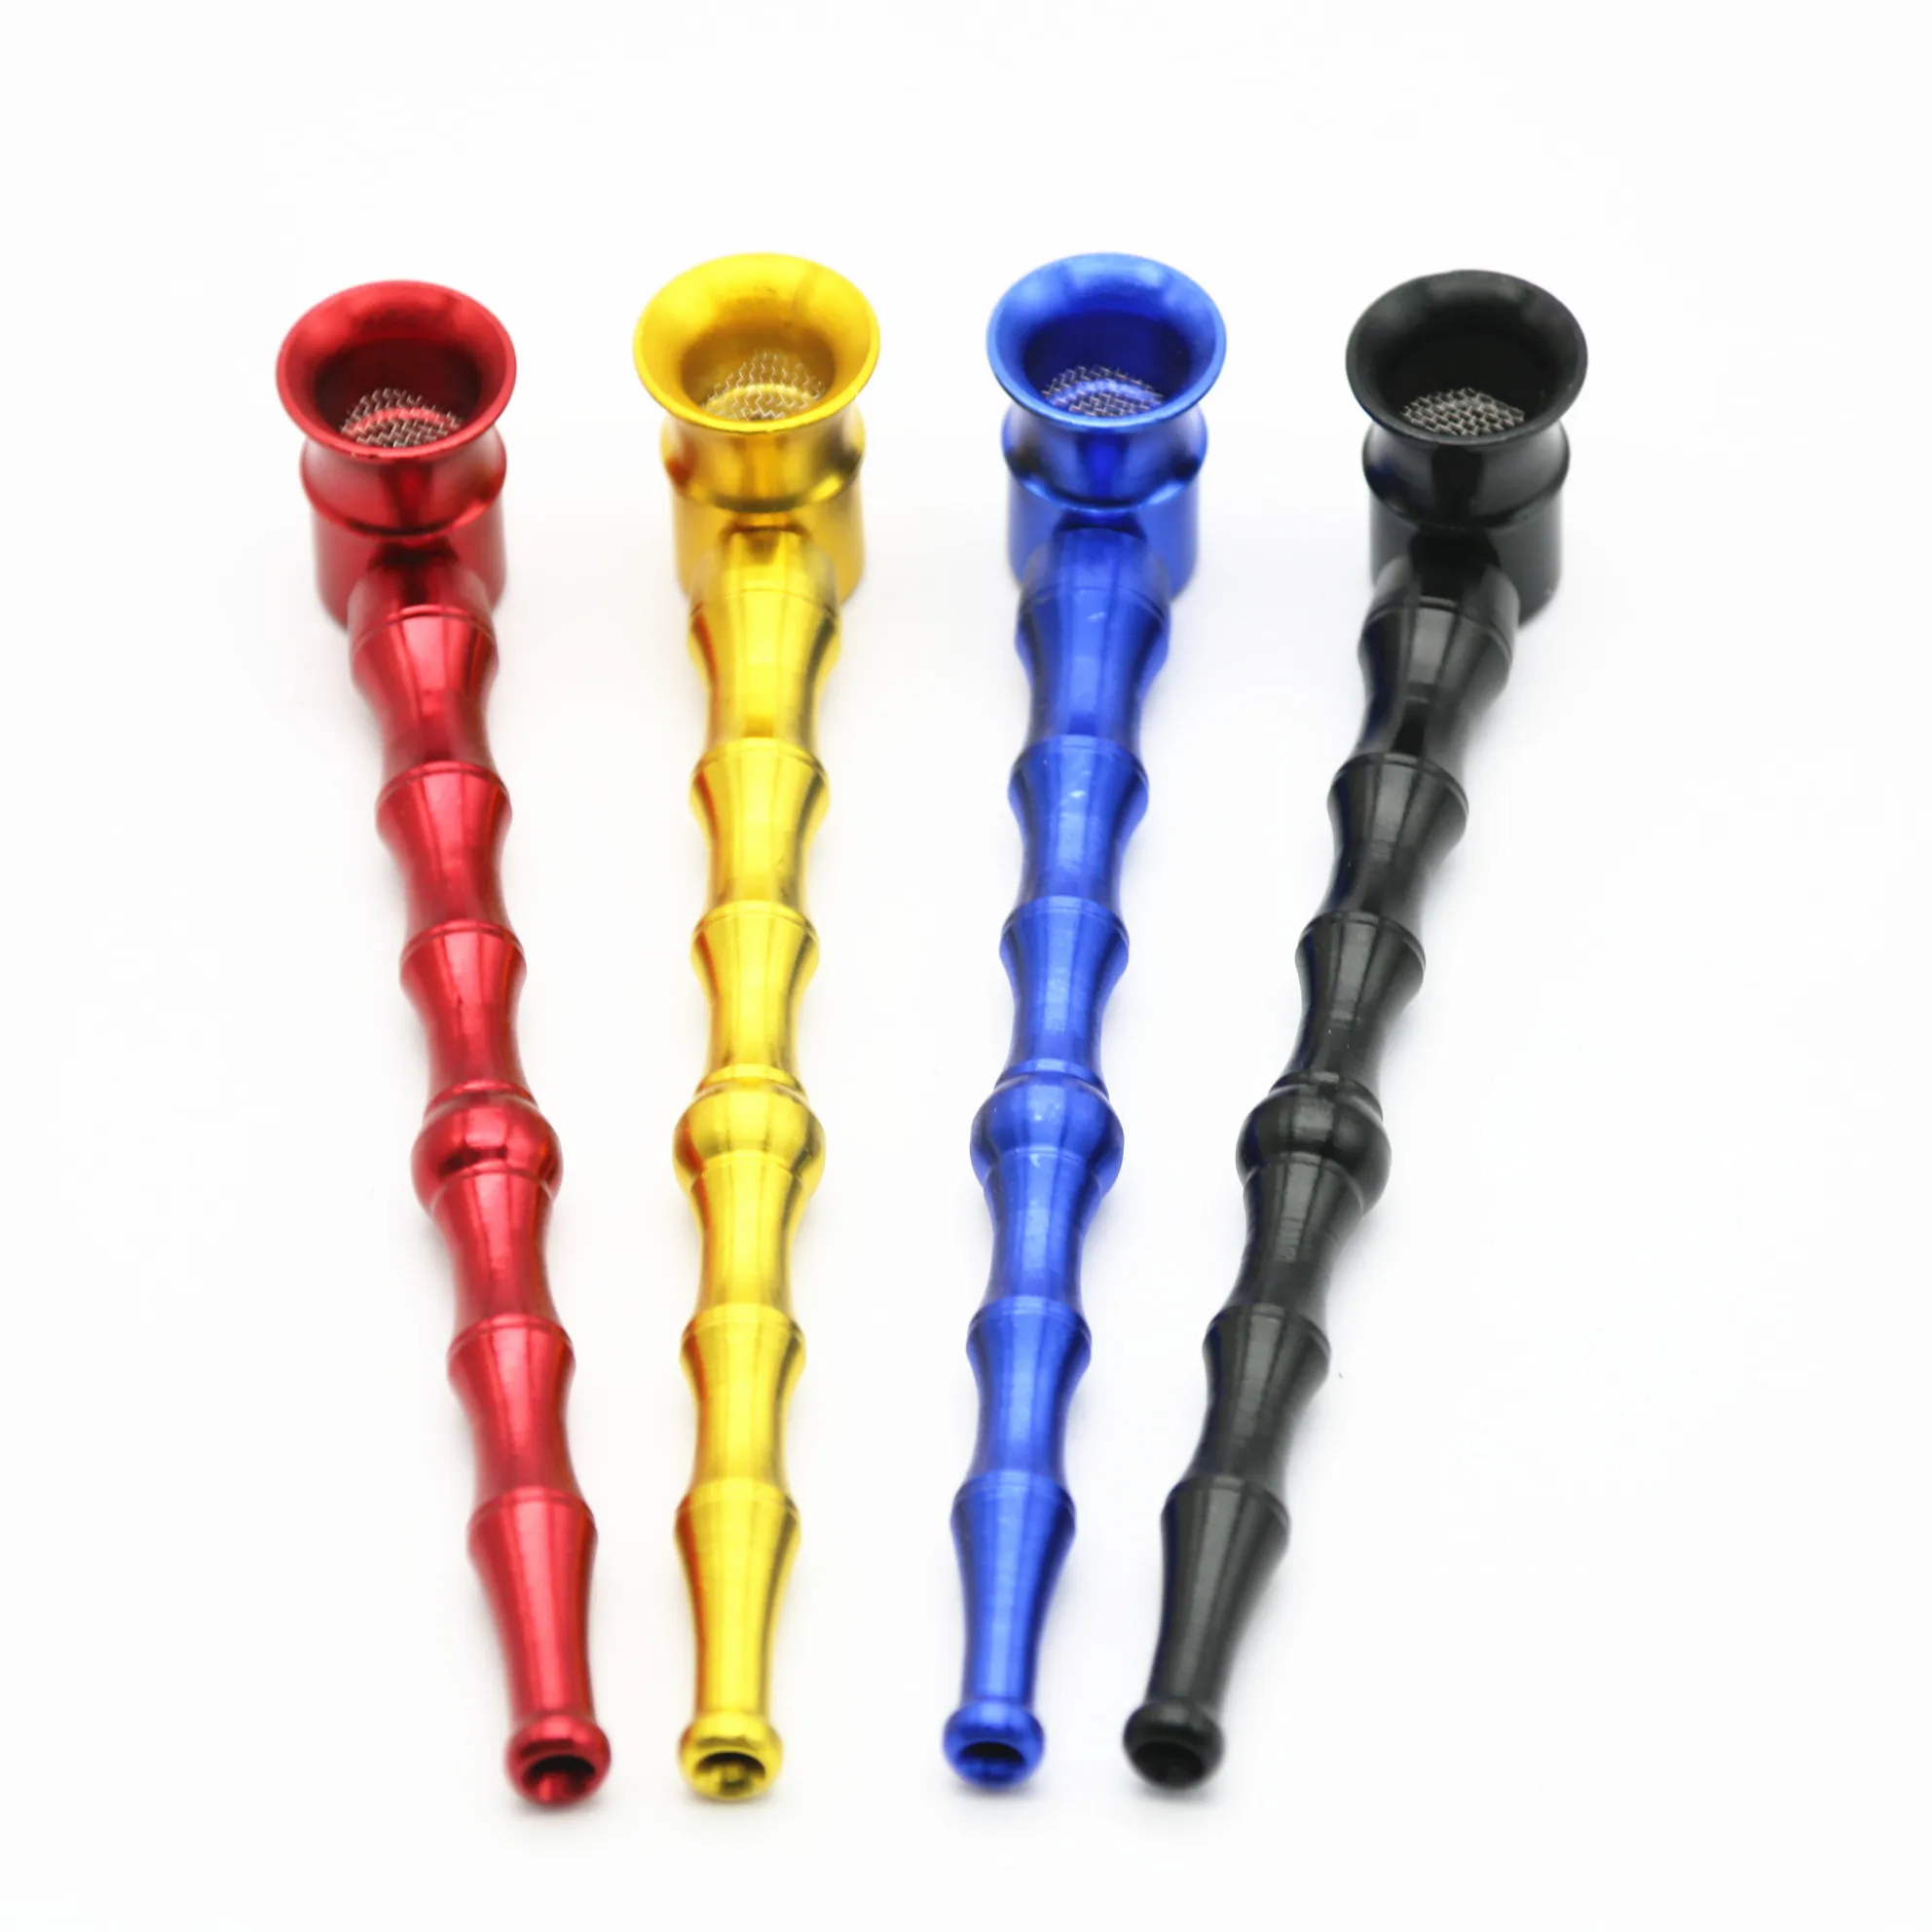 

Portable Metal Aluminum Chinese Bamboo Shape Smoking Tobacco Pipes for Weed length 128MM EKJ P0023, Red/blue/gold/black/silver